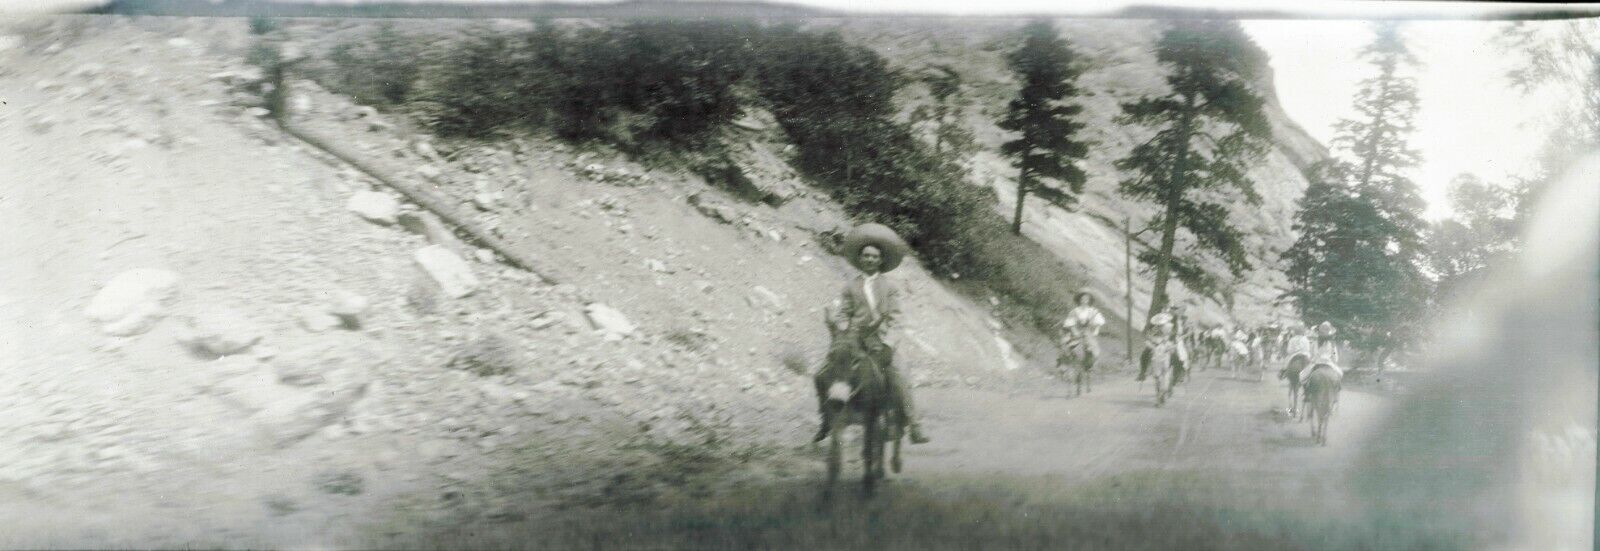 1906 Riding Donkeys Descending Grand Canyon Panoramic Photo Negative Old West